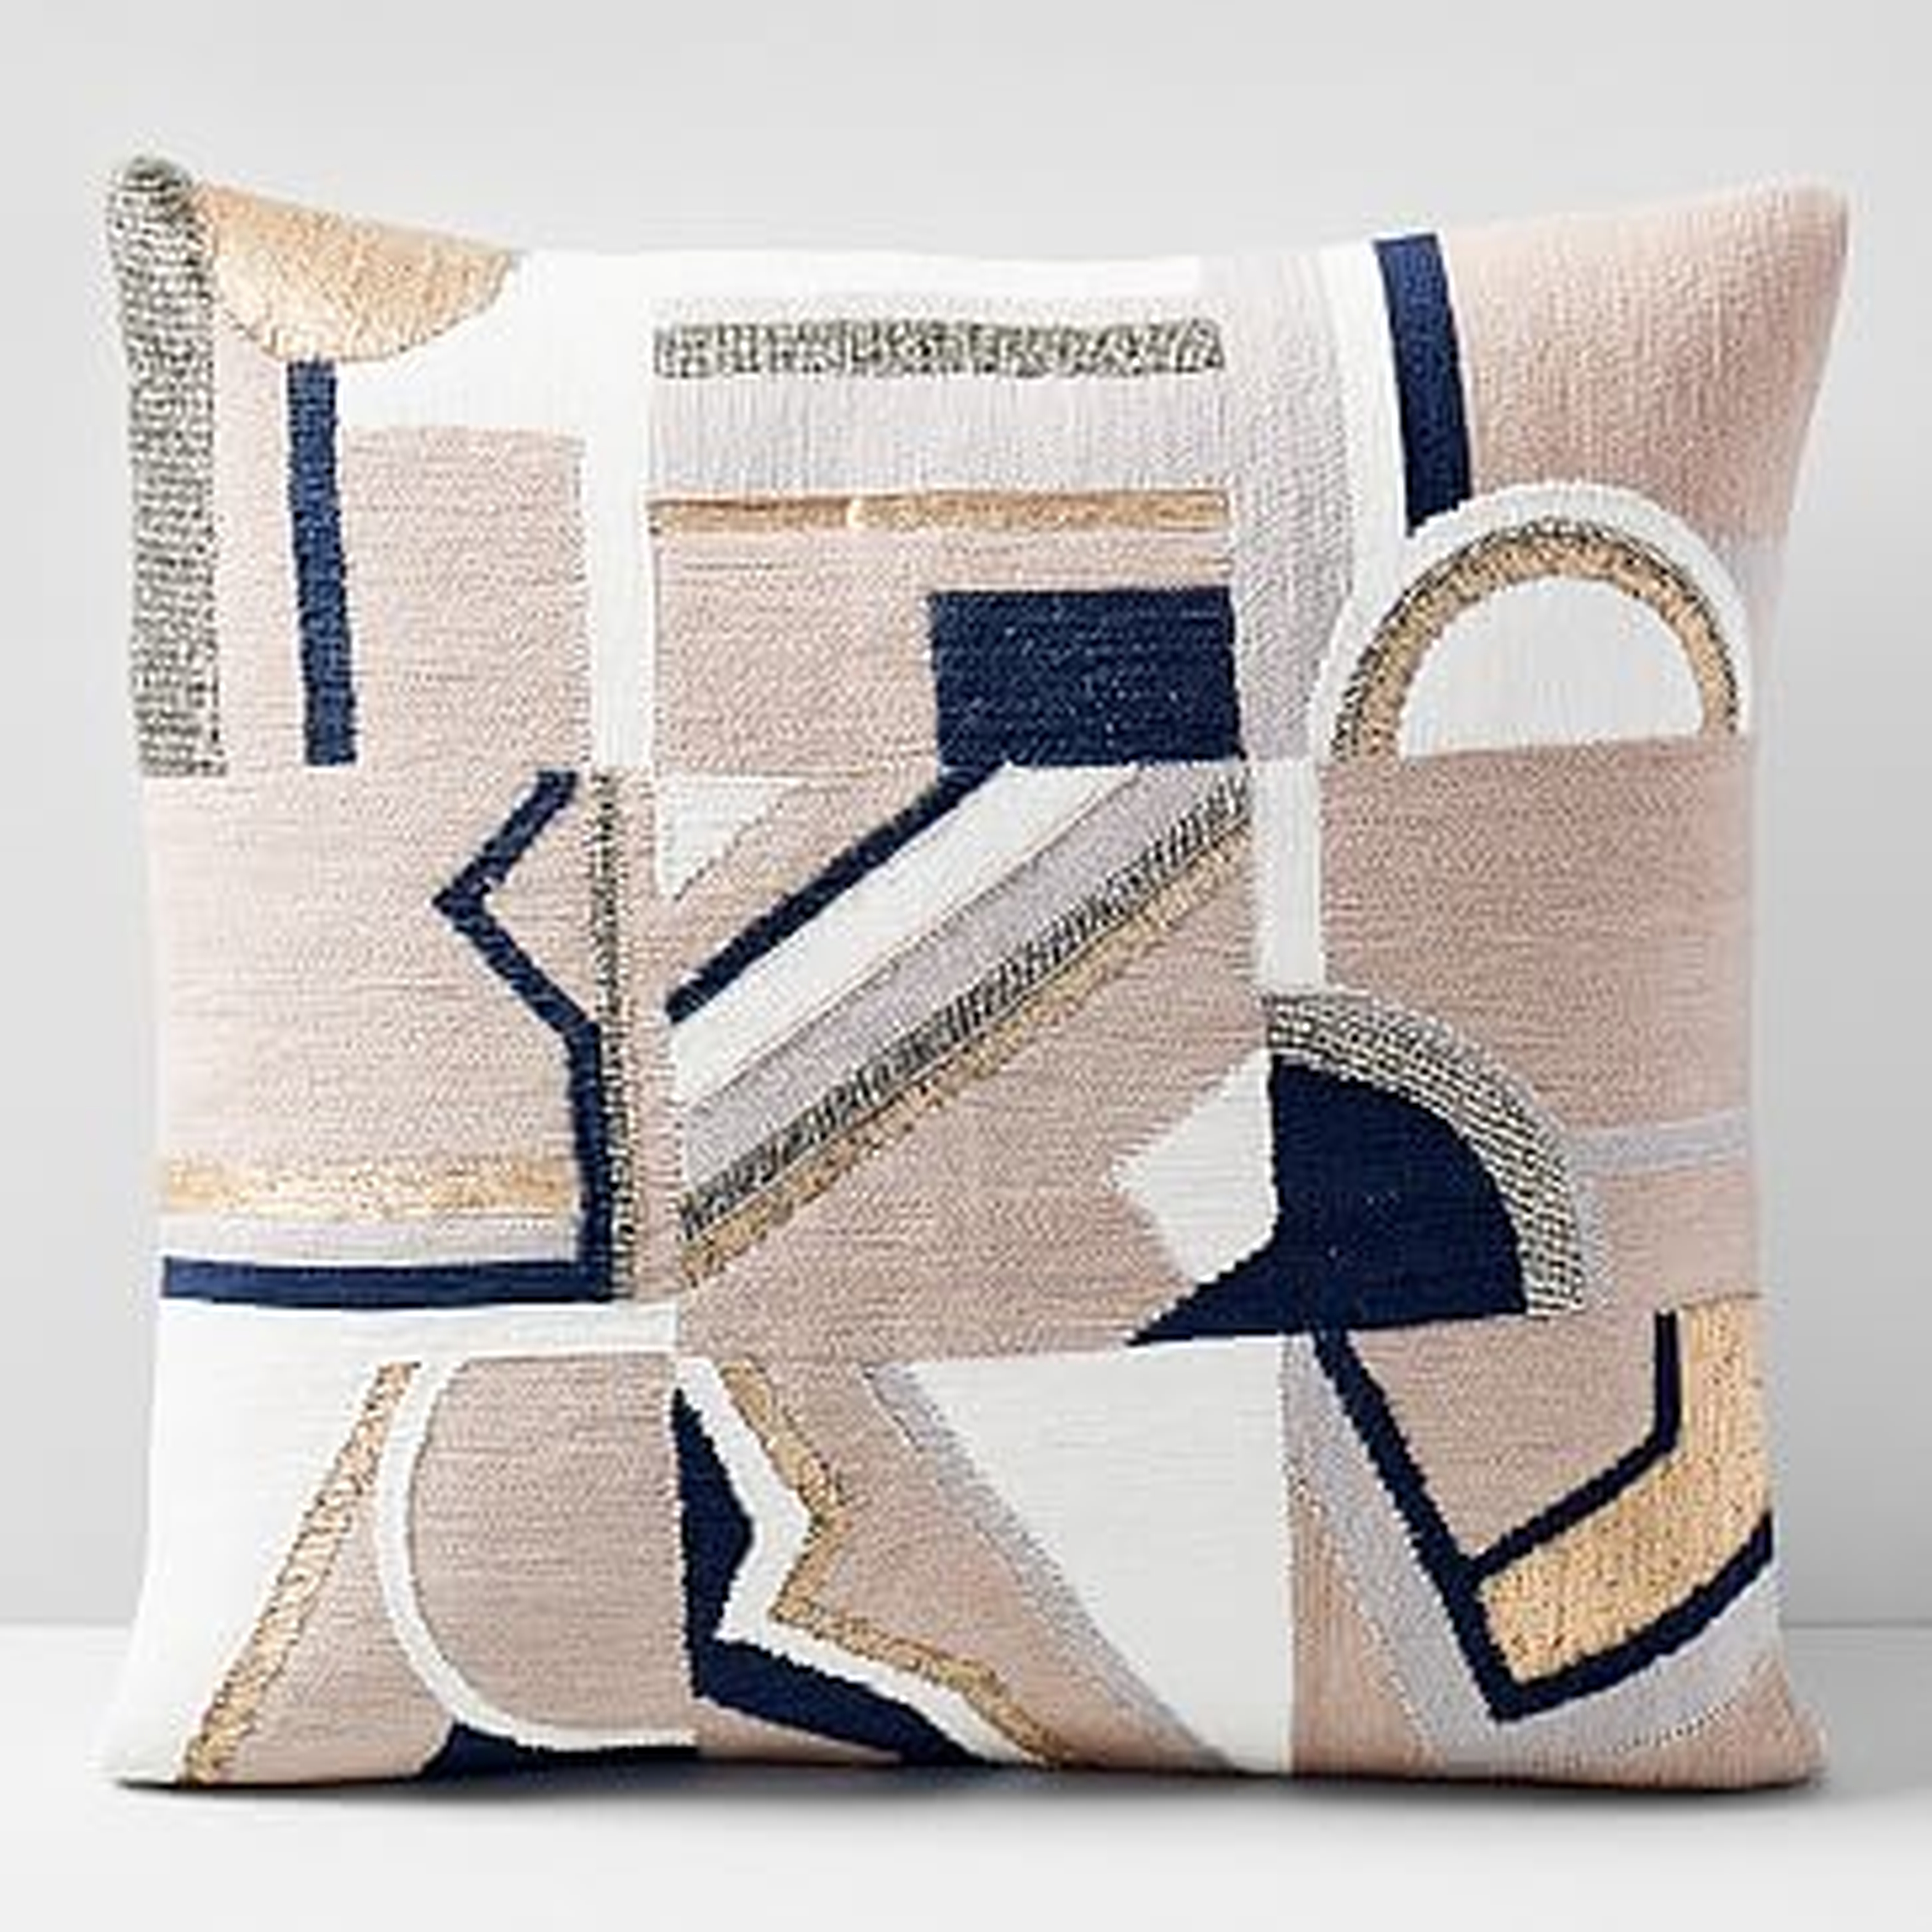 Embellished Deco Mix Pillow Cover, 18"x18", Dusty Blush - West Elm